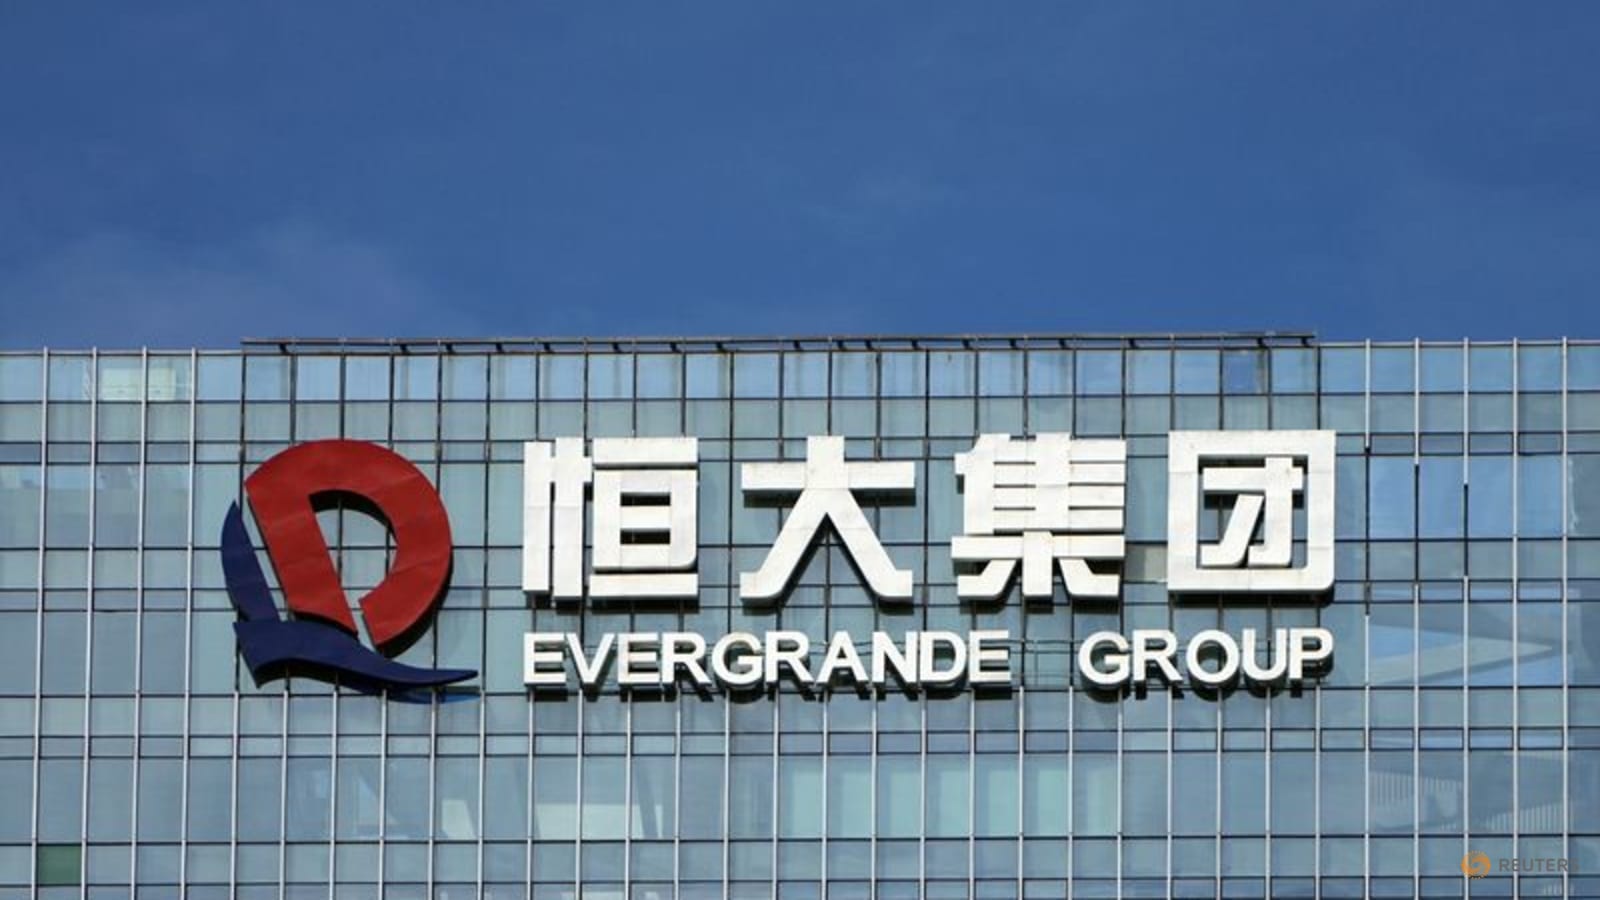 Hong Kong's audit watchdog to investigate PwC audit role in Evergrande